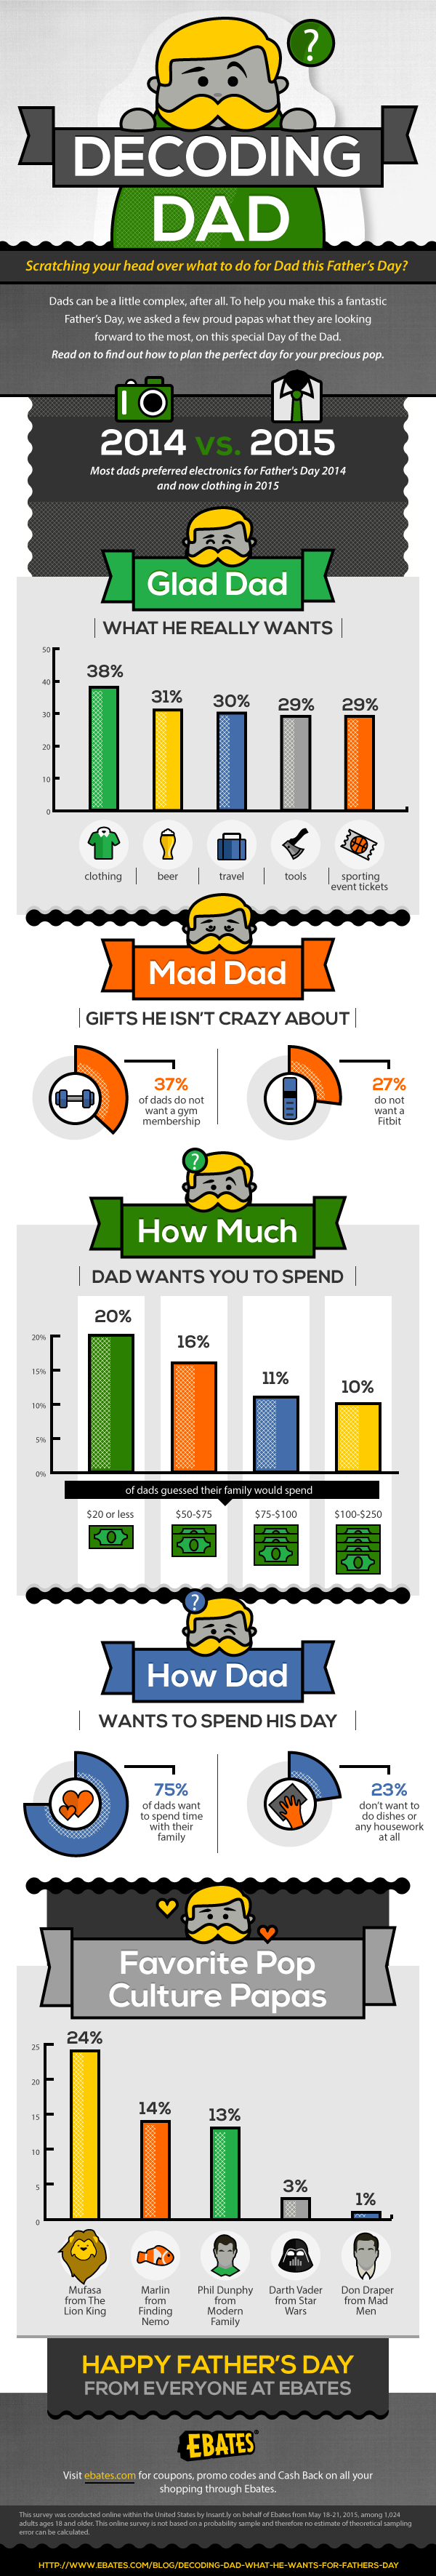 Decoding Dad What He Wants for Father's Day